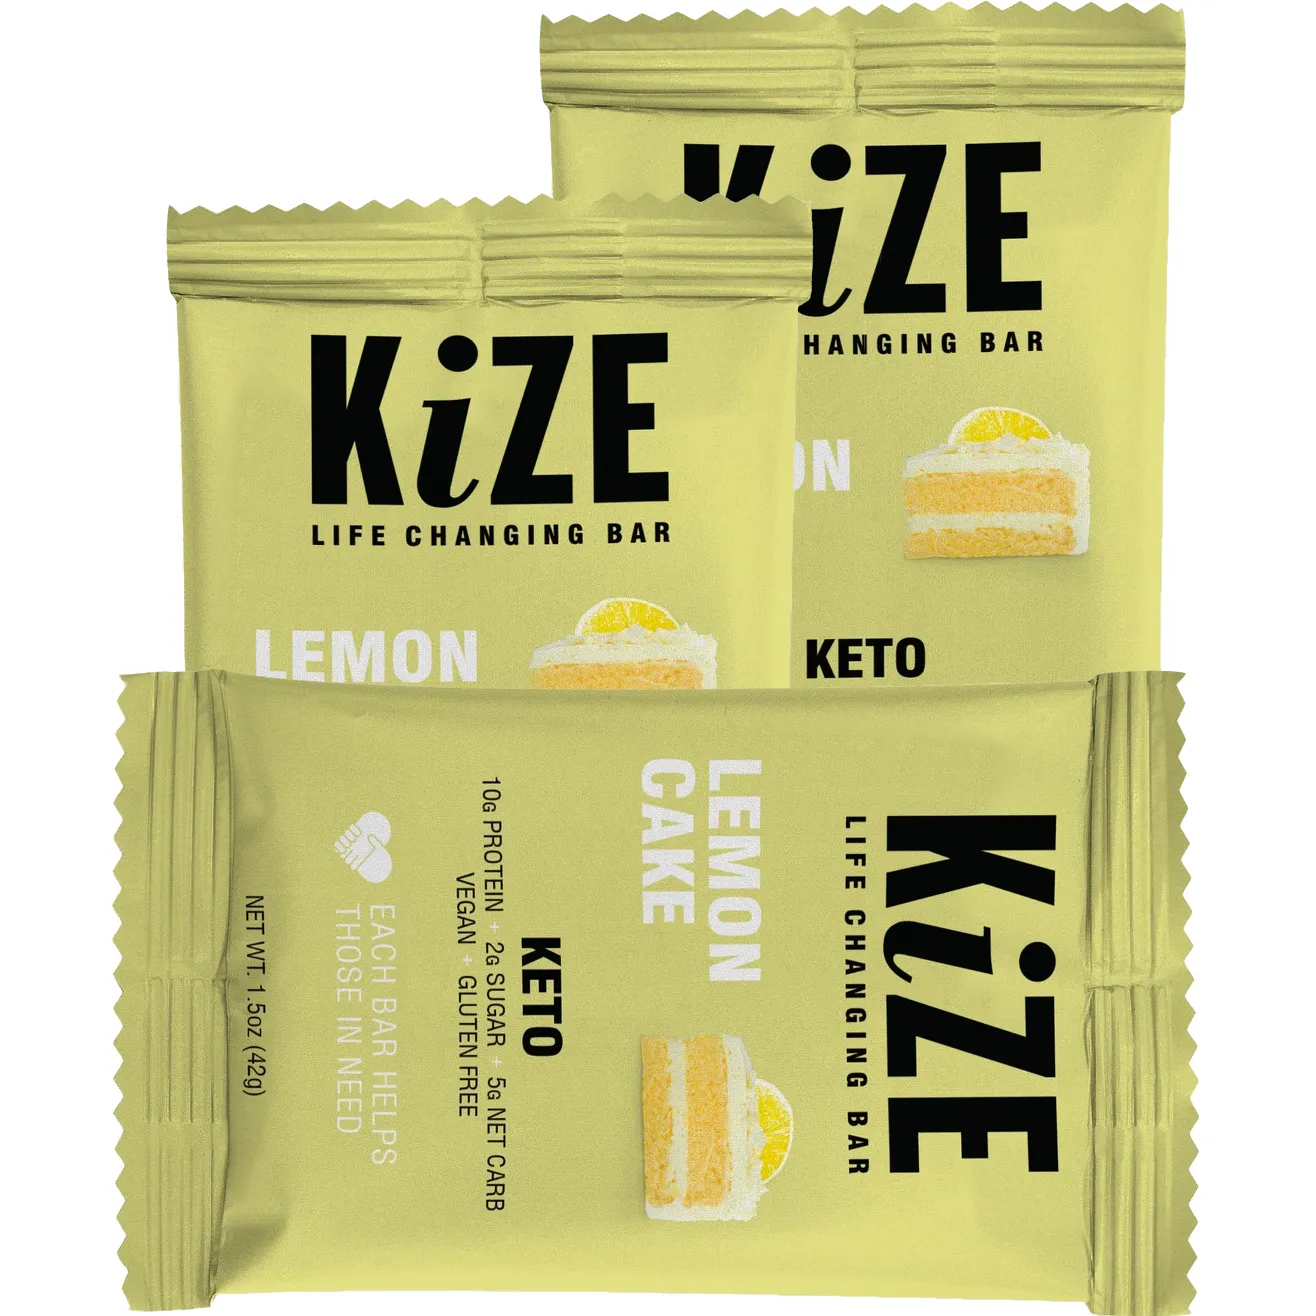 Free Life Changing Bar By KiZE